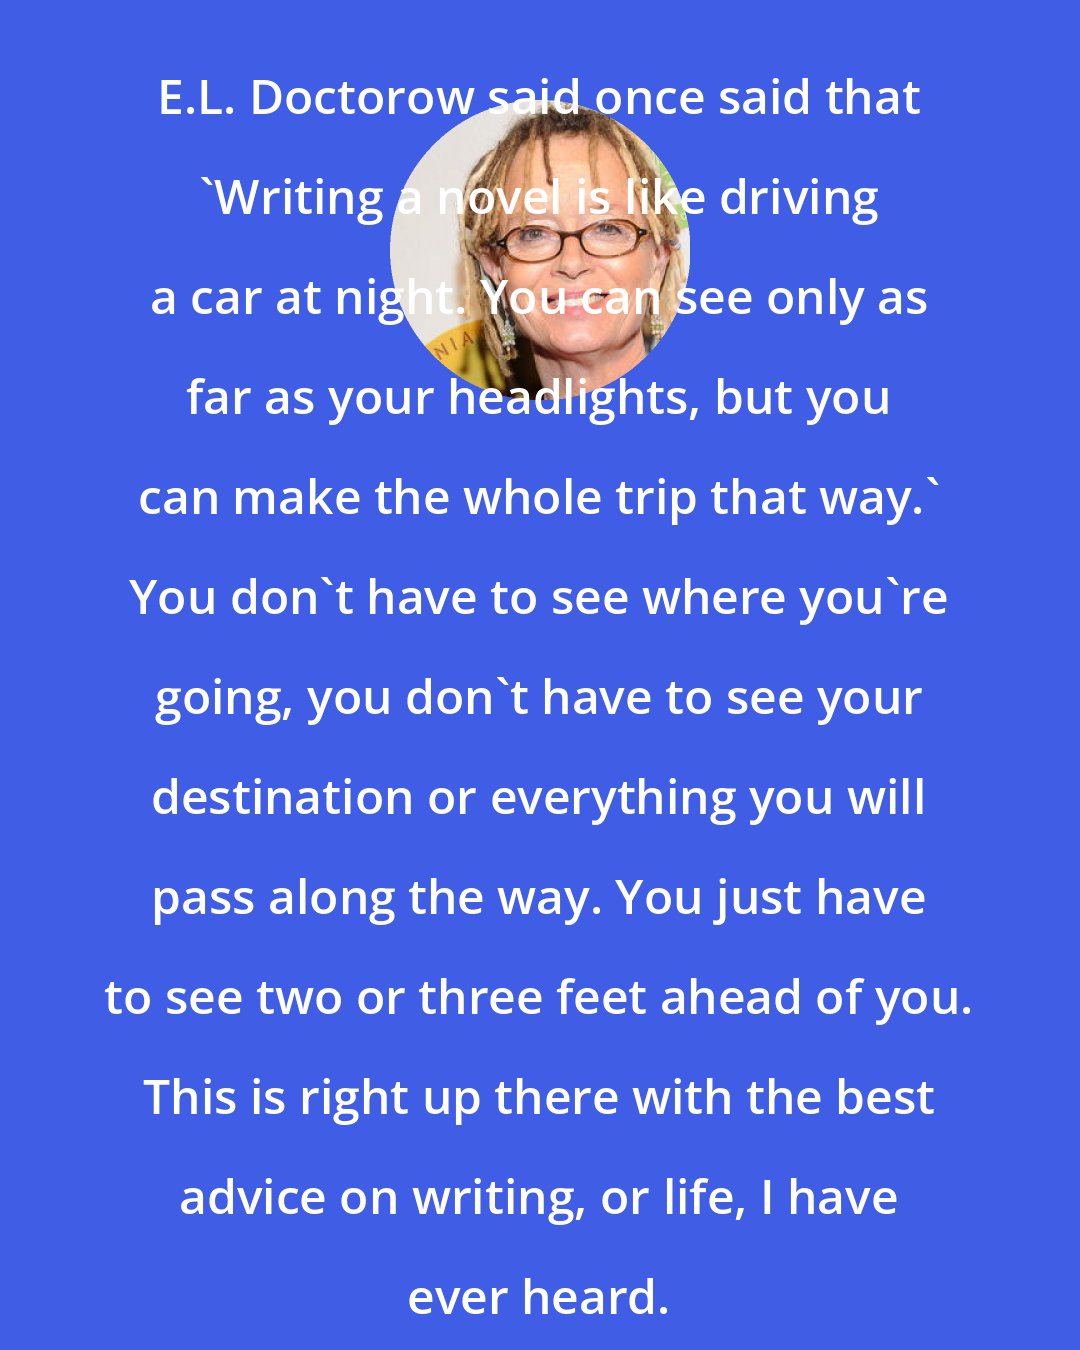 Anne Lamott: E.L. Doctorow said once said that 'Writing a novel is like driving a car at night. You can see only as far as your headlights, but you can make the whole trip that way.' You don't have to see where you're going, you don't have to see your destination or everything you will pass along the way. You just have to see two or three feet ahead of you. This is right up there with the best advice on writing, or life, I have ever heard.